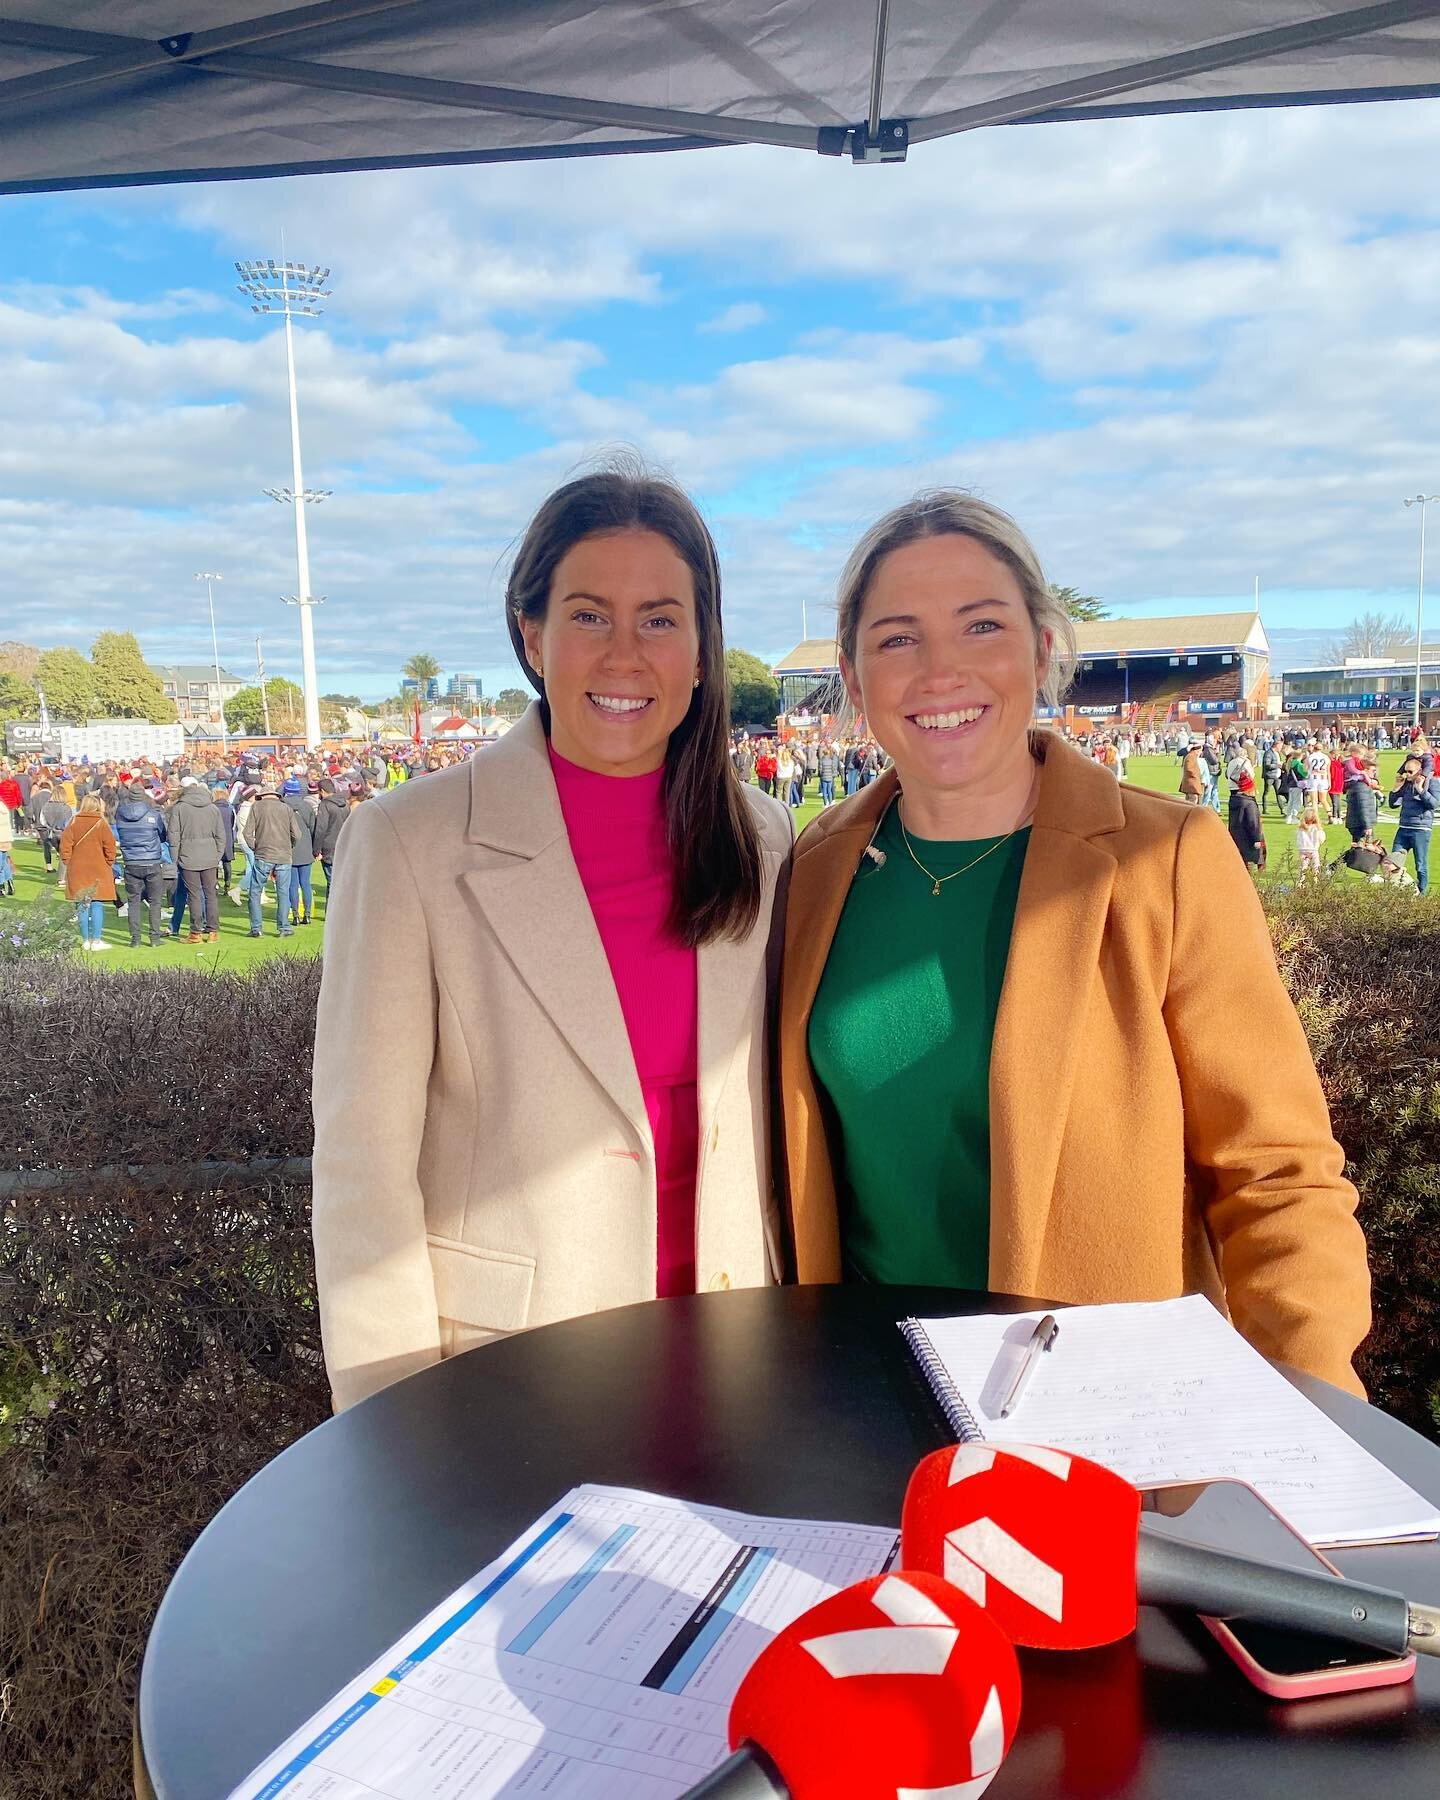 Grand Final Day @7afl @melissahickey18 @nigelcarmody @jo.wotton 🙌
Big congrats to the 2022 rebel VFLW Premiers, a terrific performance by the Essendon!